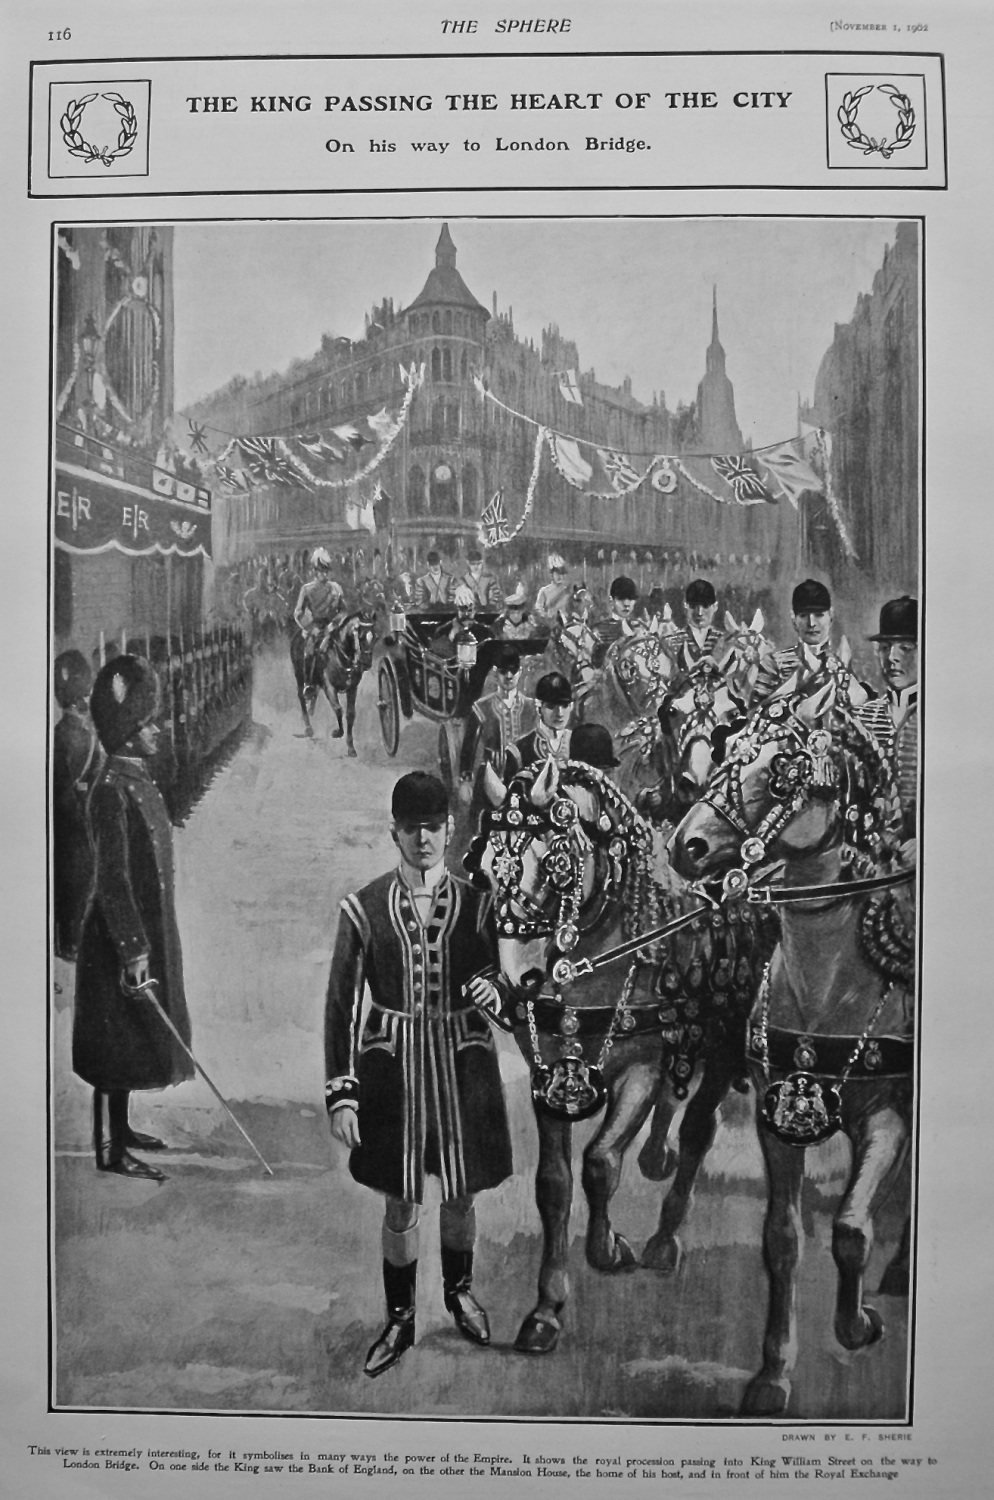 The King Passing the Heart of the City on his way to London Bridge.  1902.